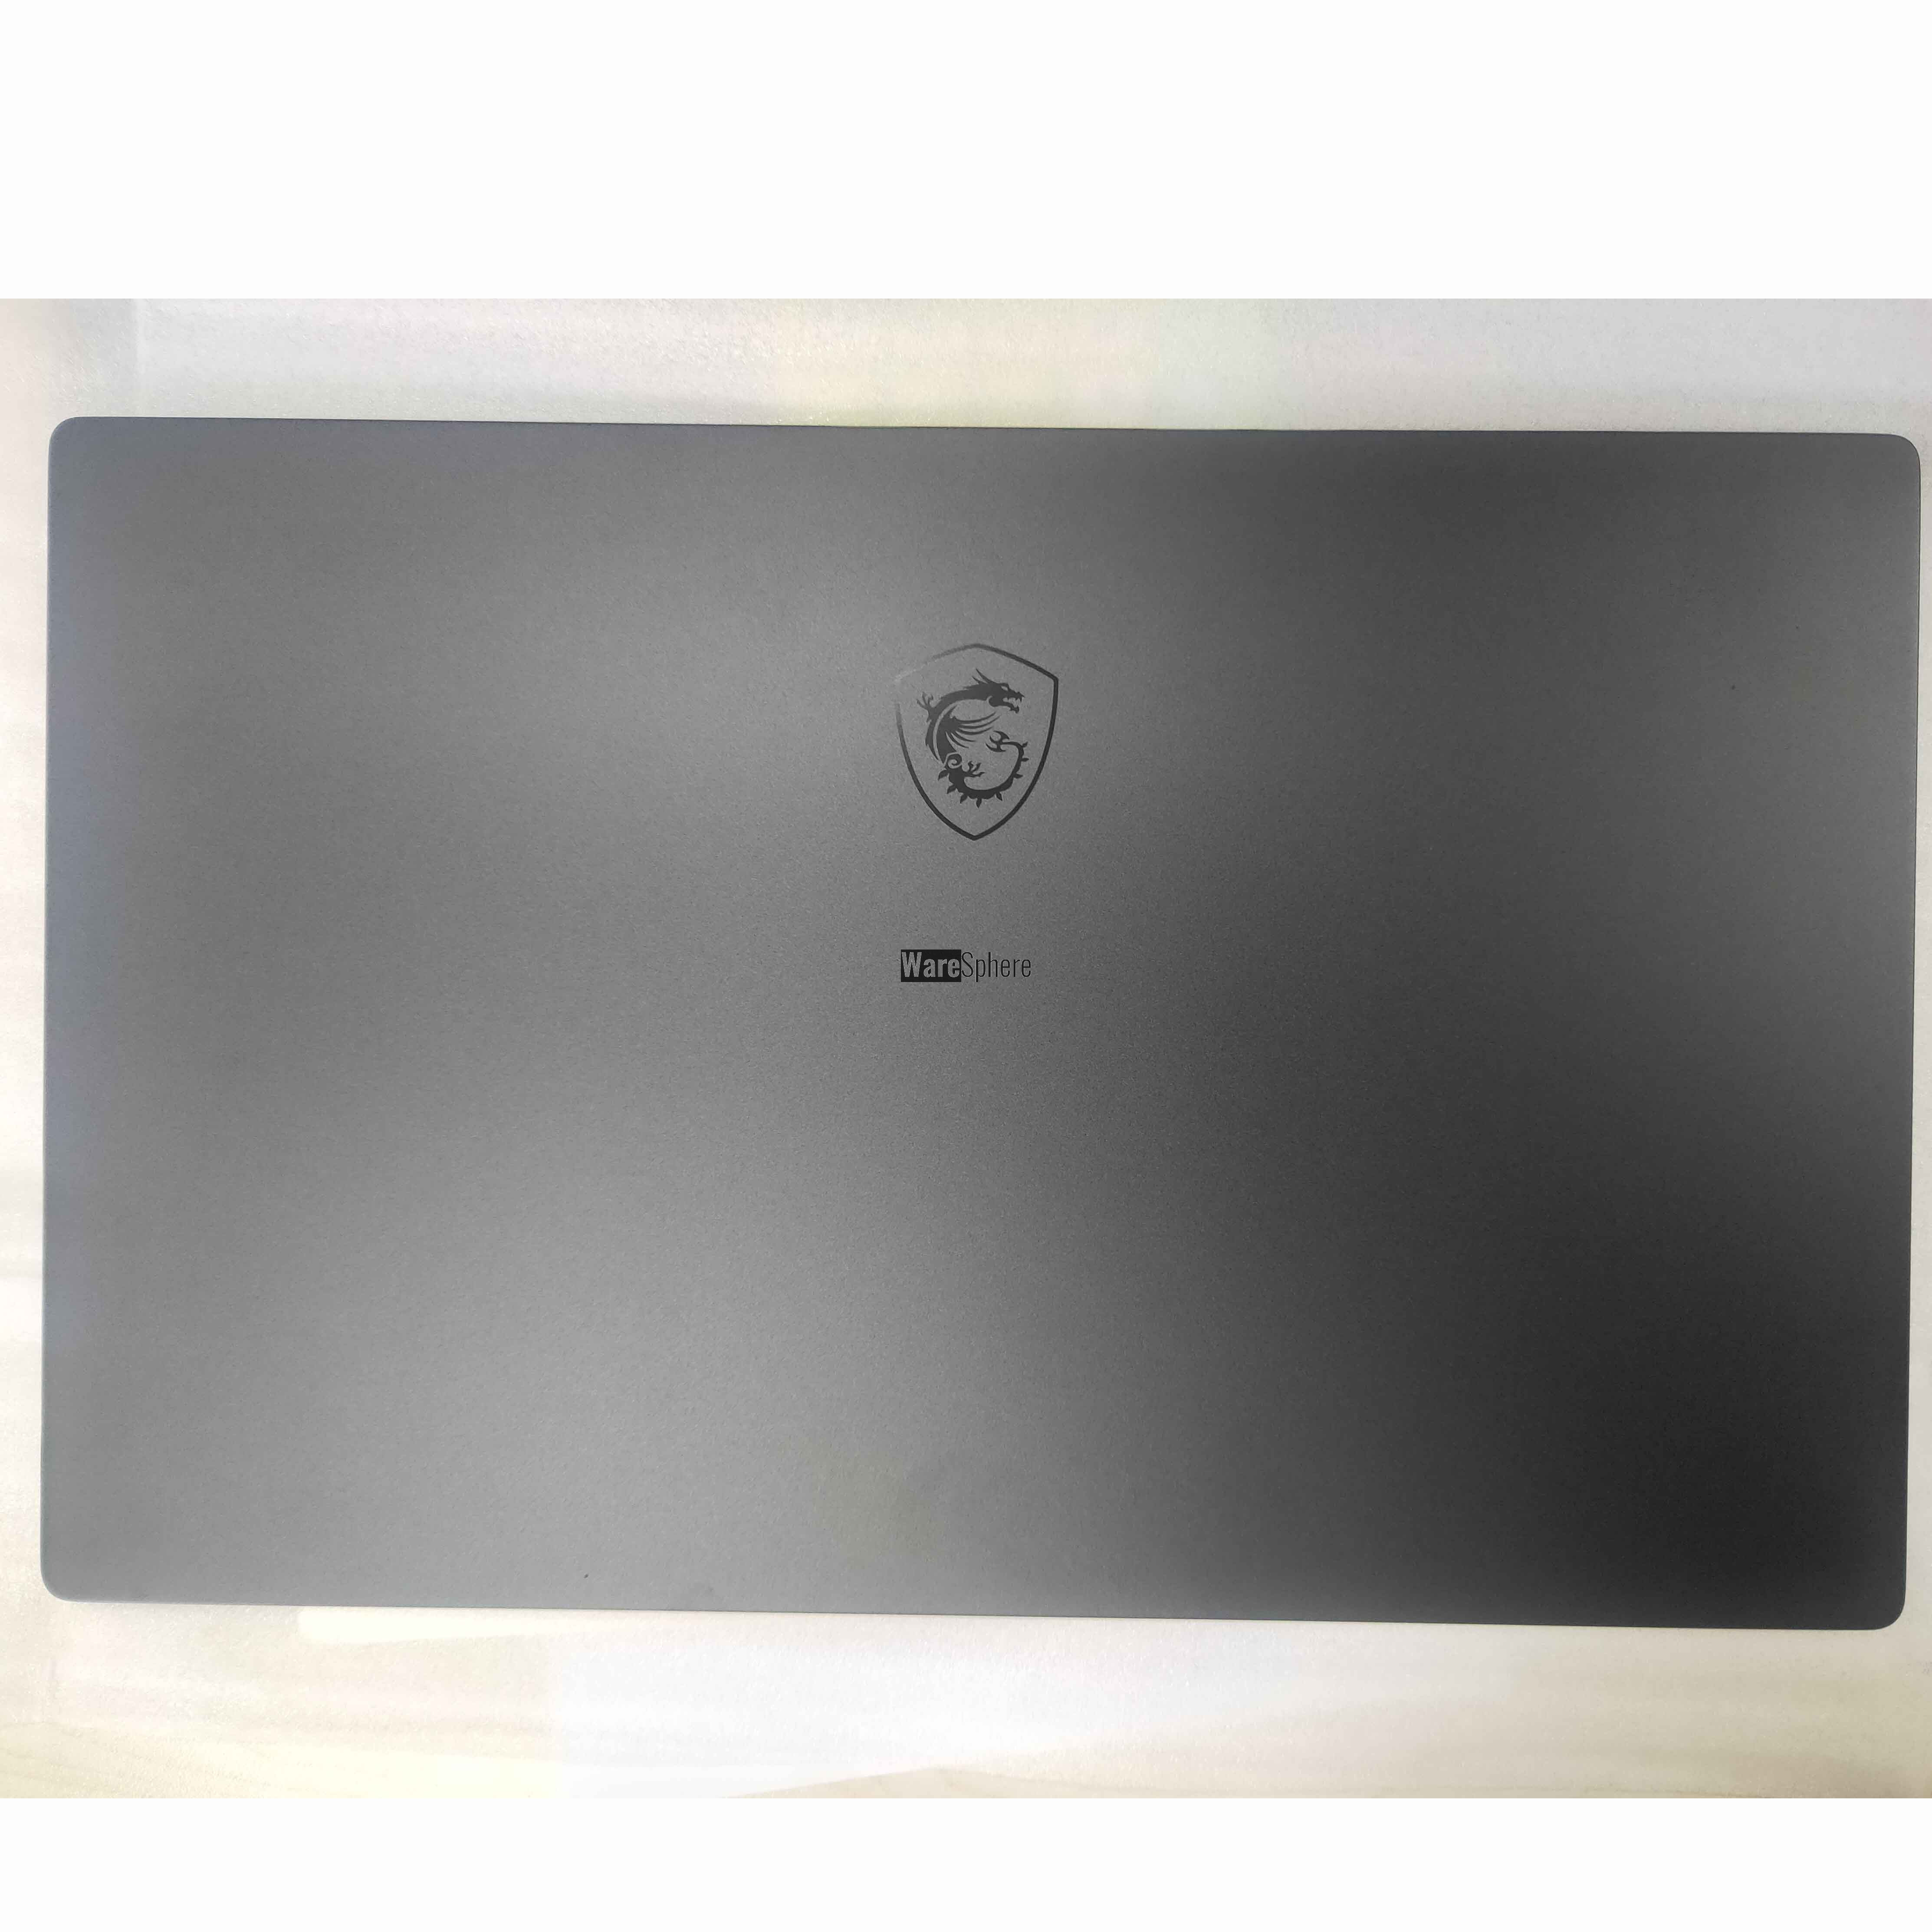 LCD Back Cover for MSI GS76 MS-17M1 7M1A212 Black